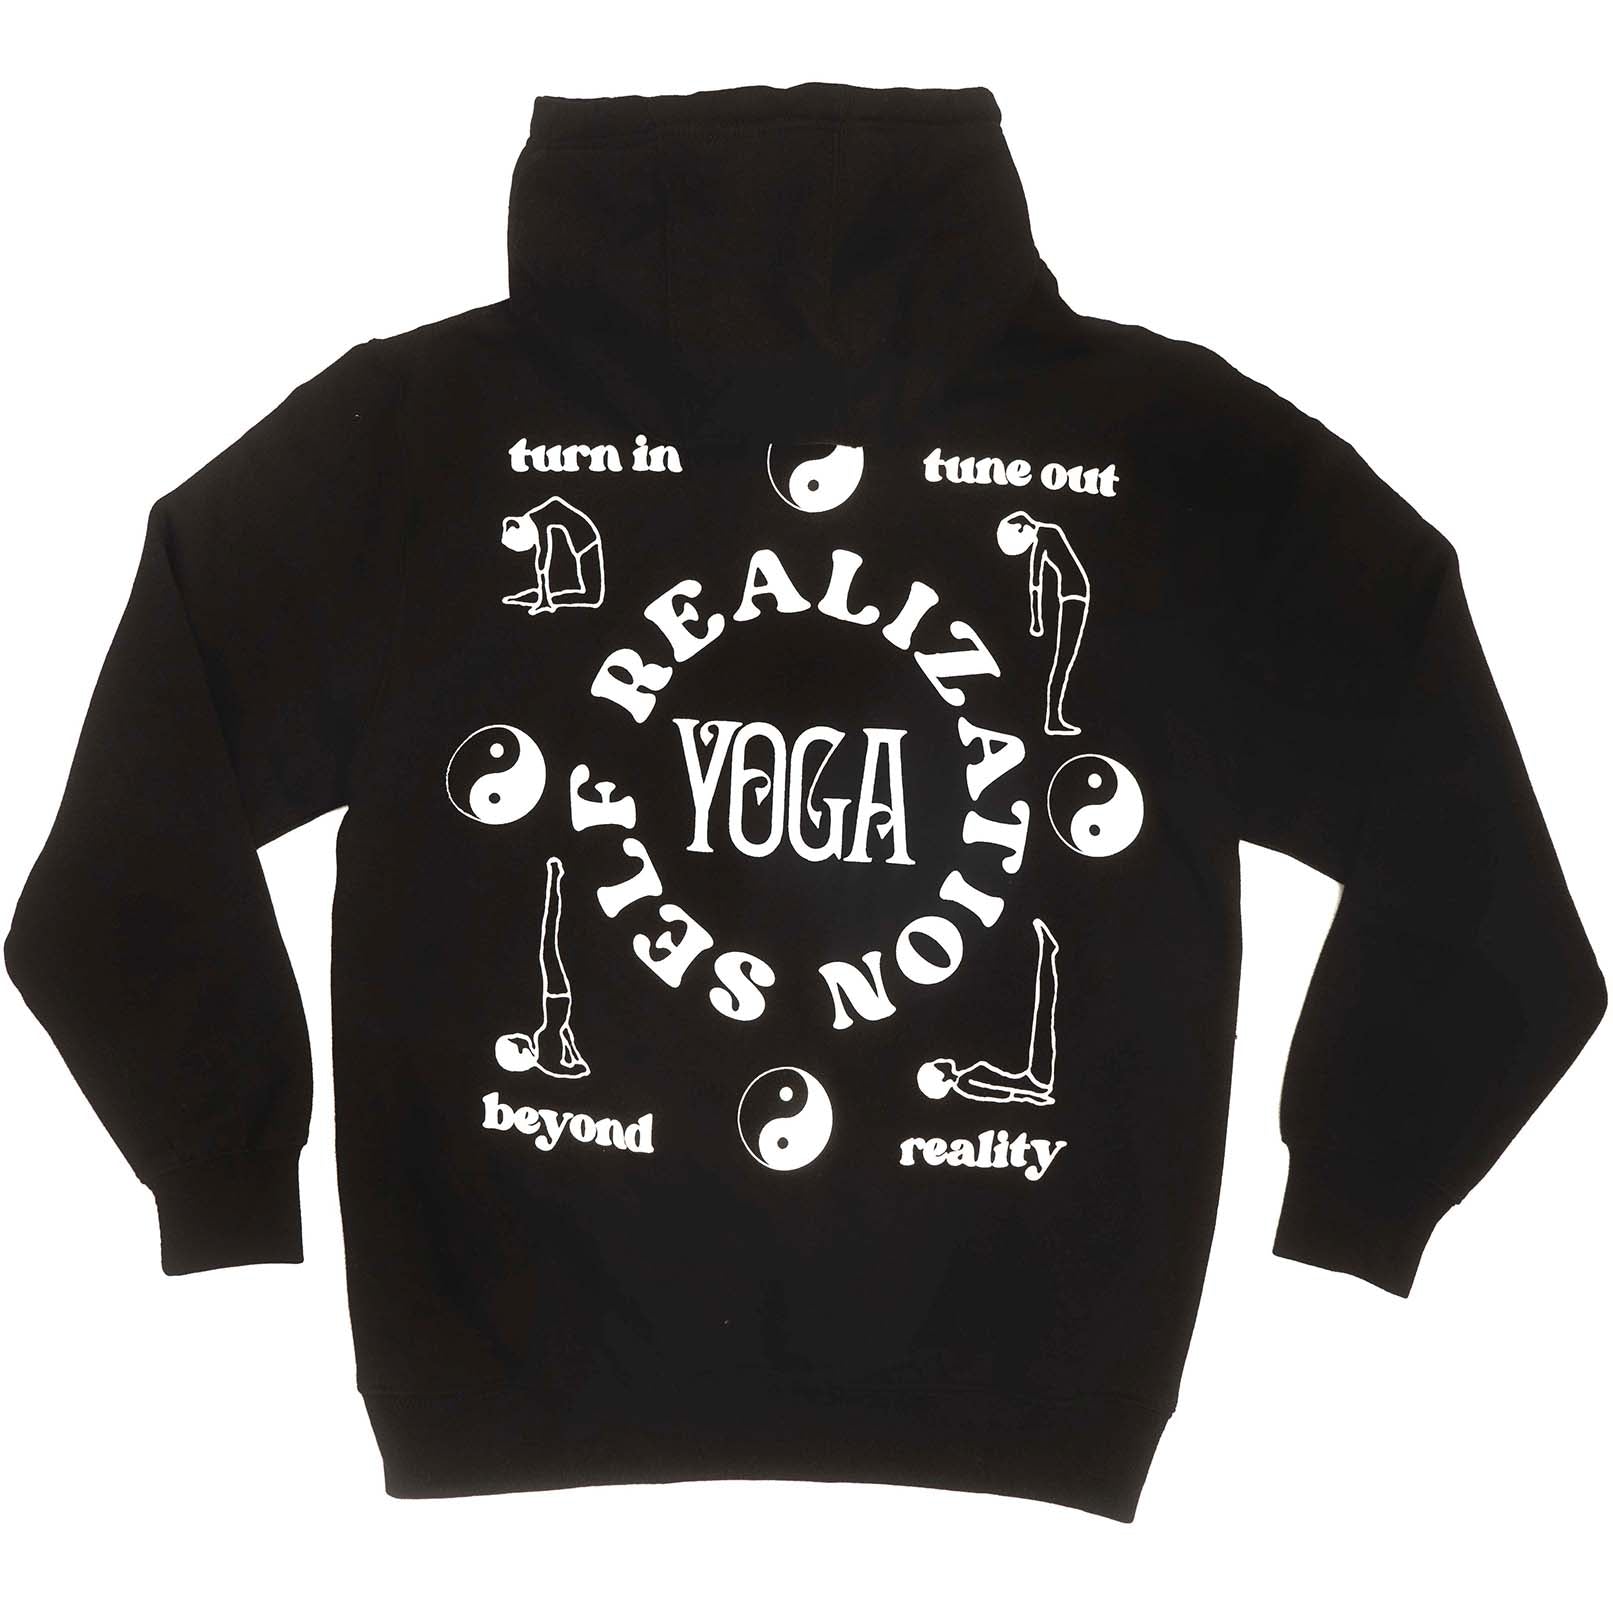 men's graphic black fleece hoodie with yin yang symbols , yoga positions and mental health positive text printed on front and back. Full front photo.